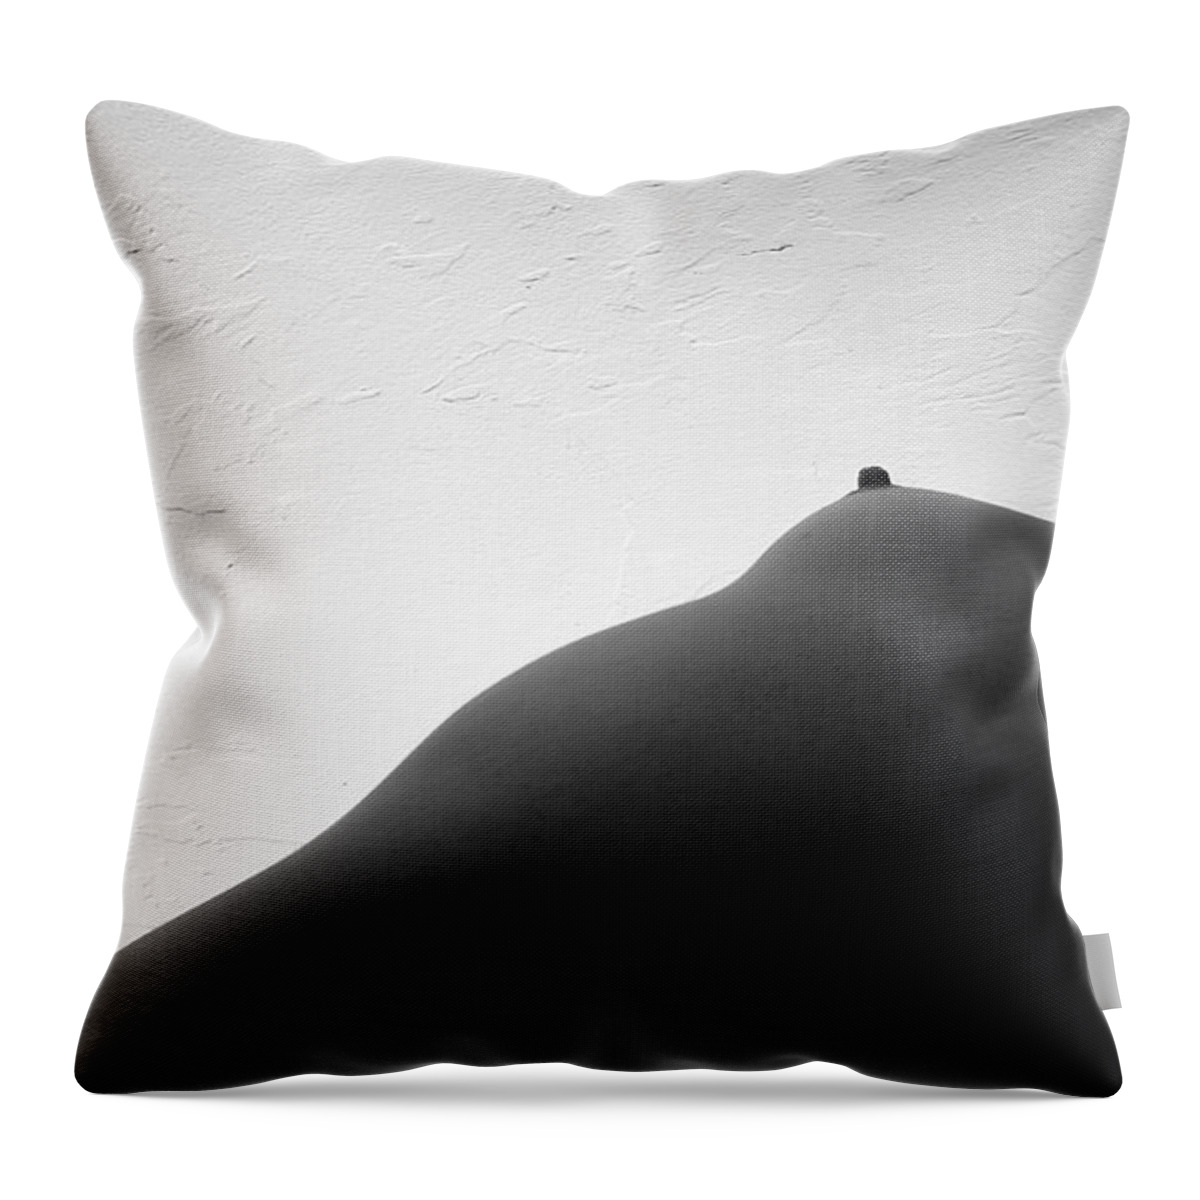 Black And White Throw Pillow featuring the photograph Bodyscape by Joe Kozlowski